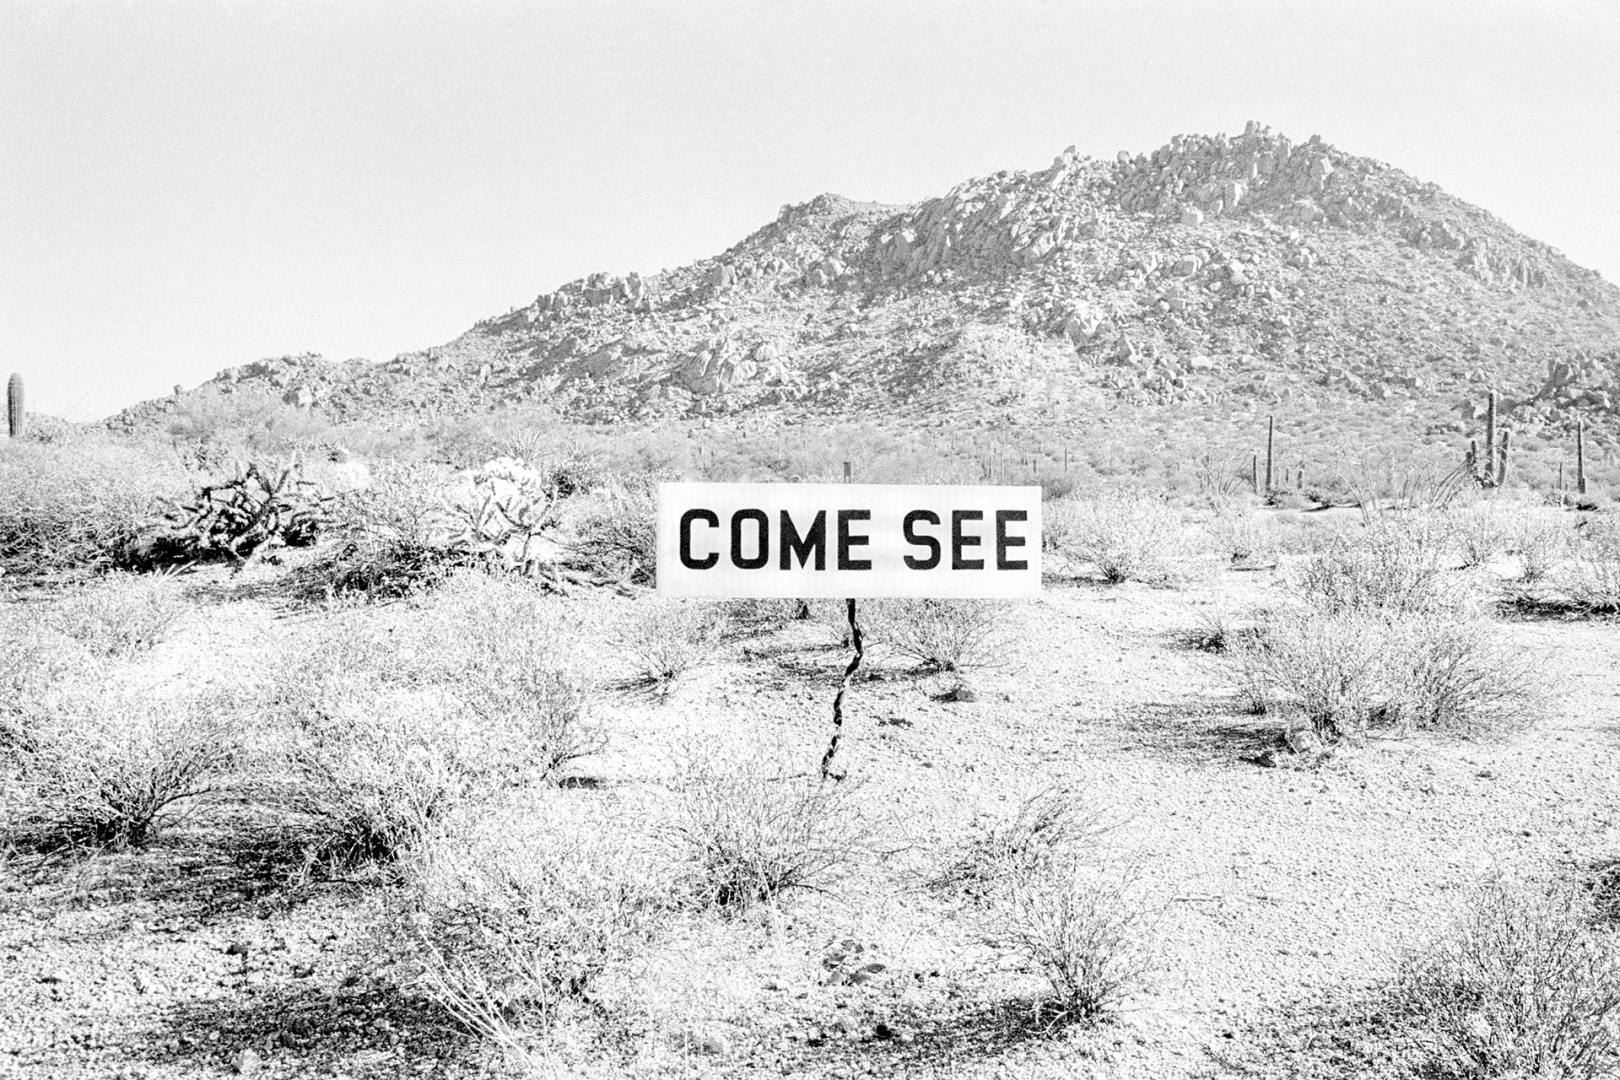 Black and white photograph of a signpost in the desert that reads 'Come see', taken from the book 'David Hurn Photographs 1955-2022'